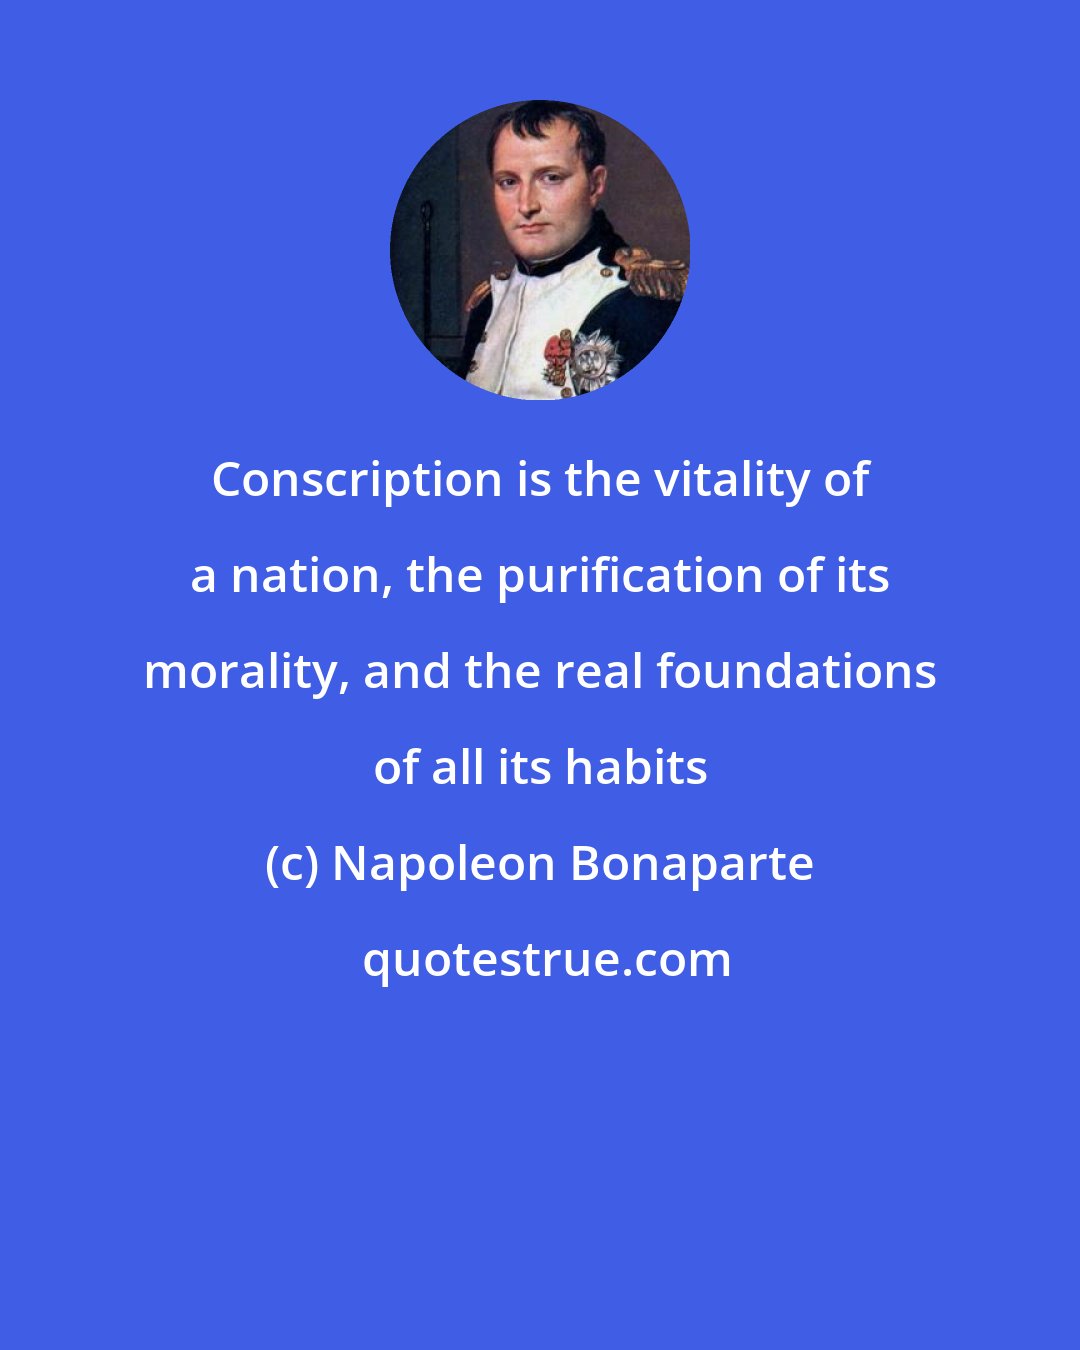 Napoleon Bonaparte: Conscription is the vitality of a nation, the purification of its morality, and the real foundations of all its habits